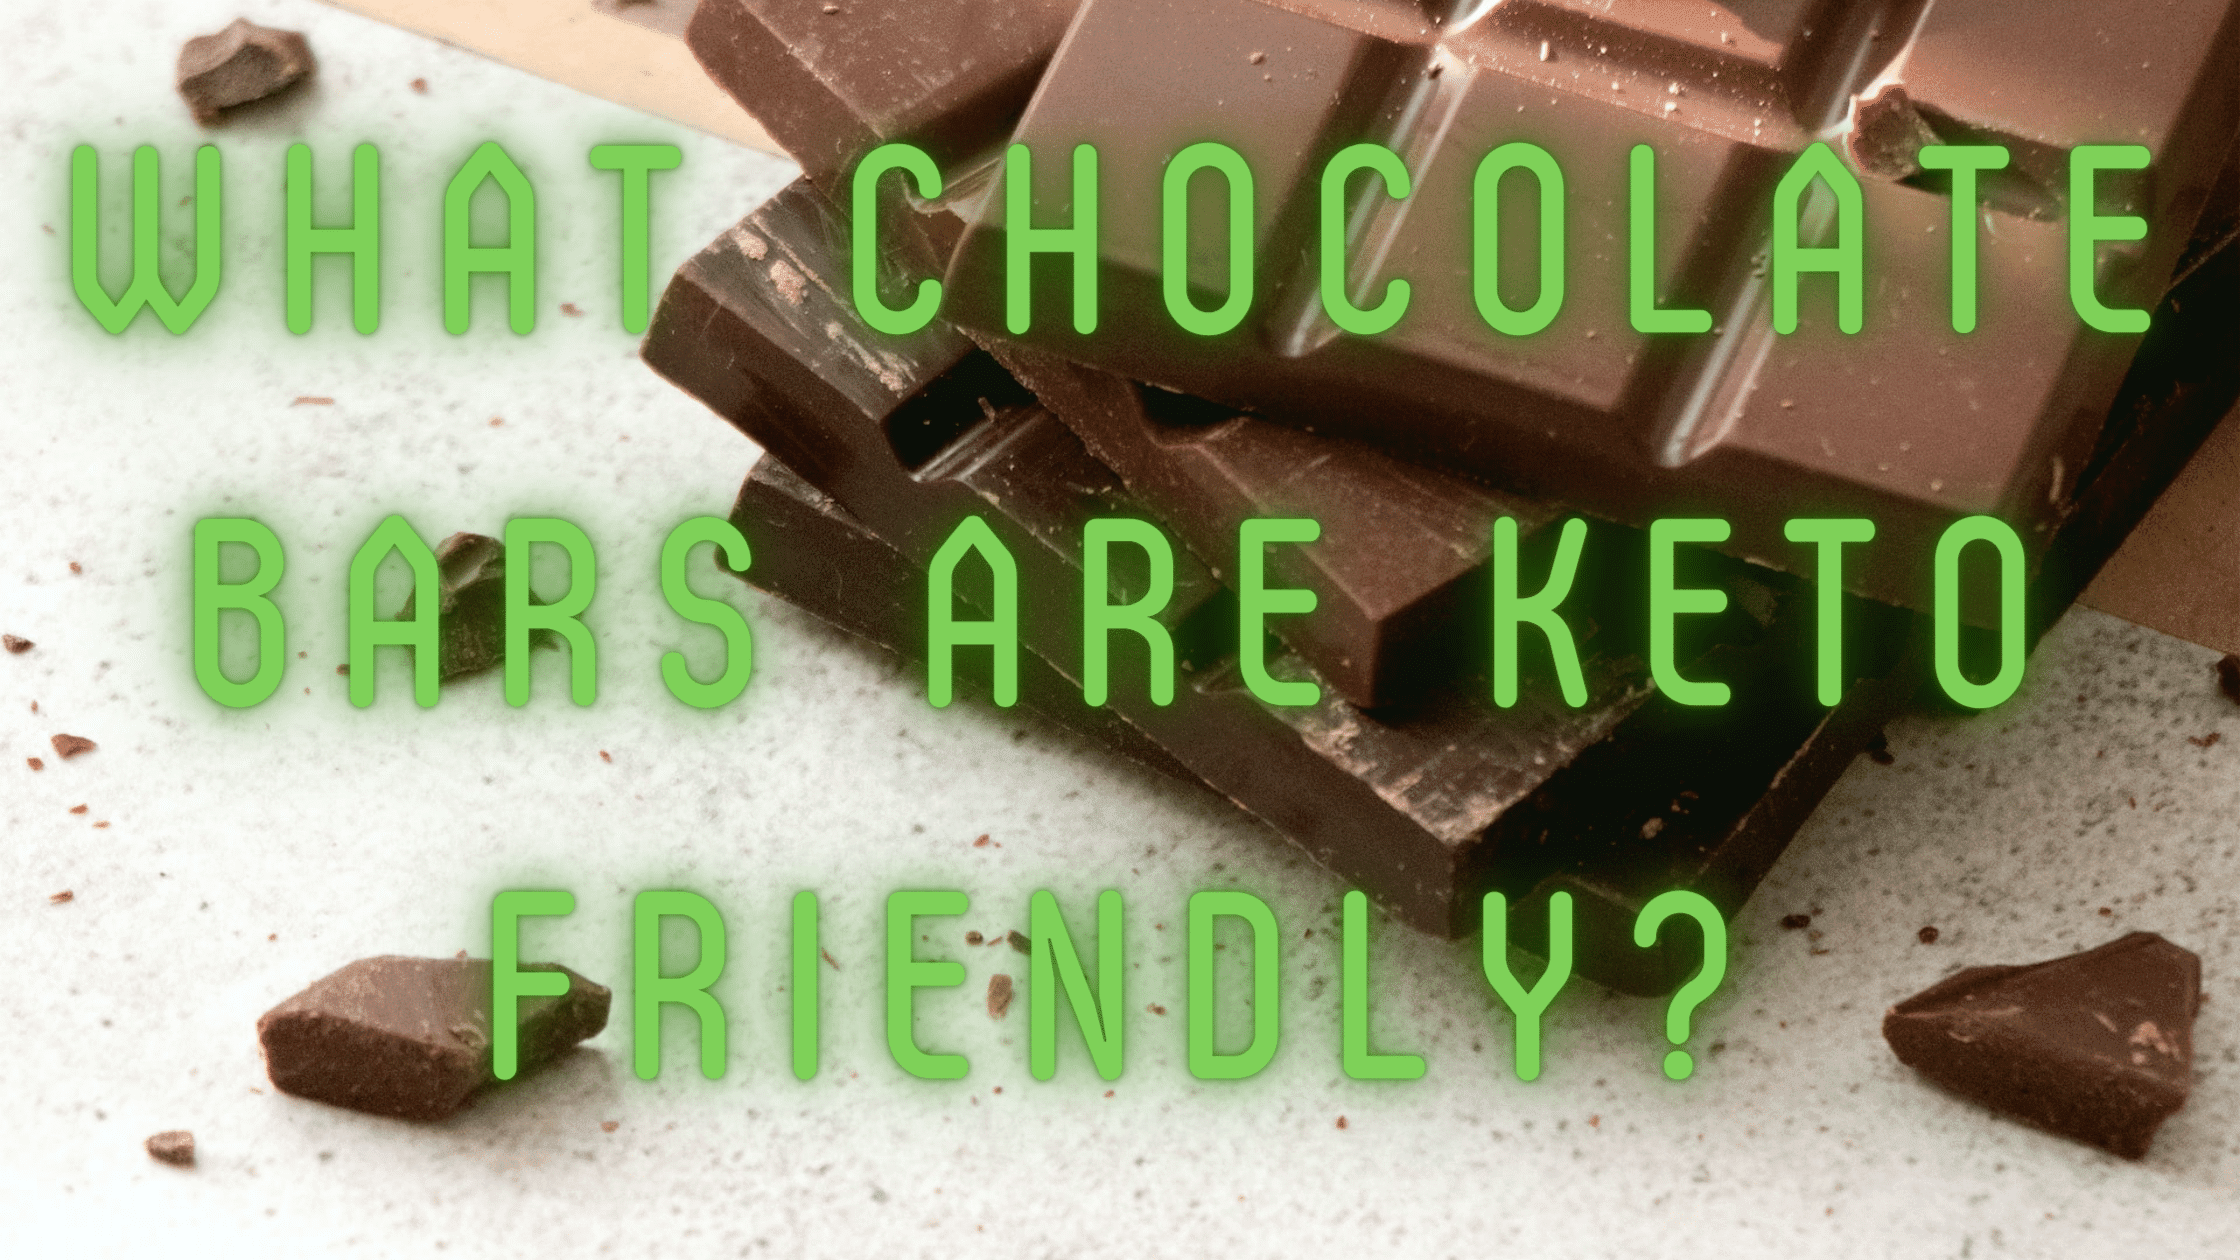 What chocolate bars are keto friendly?